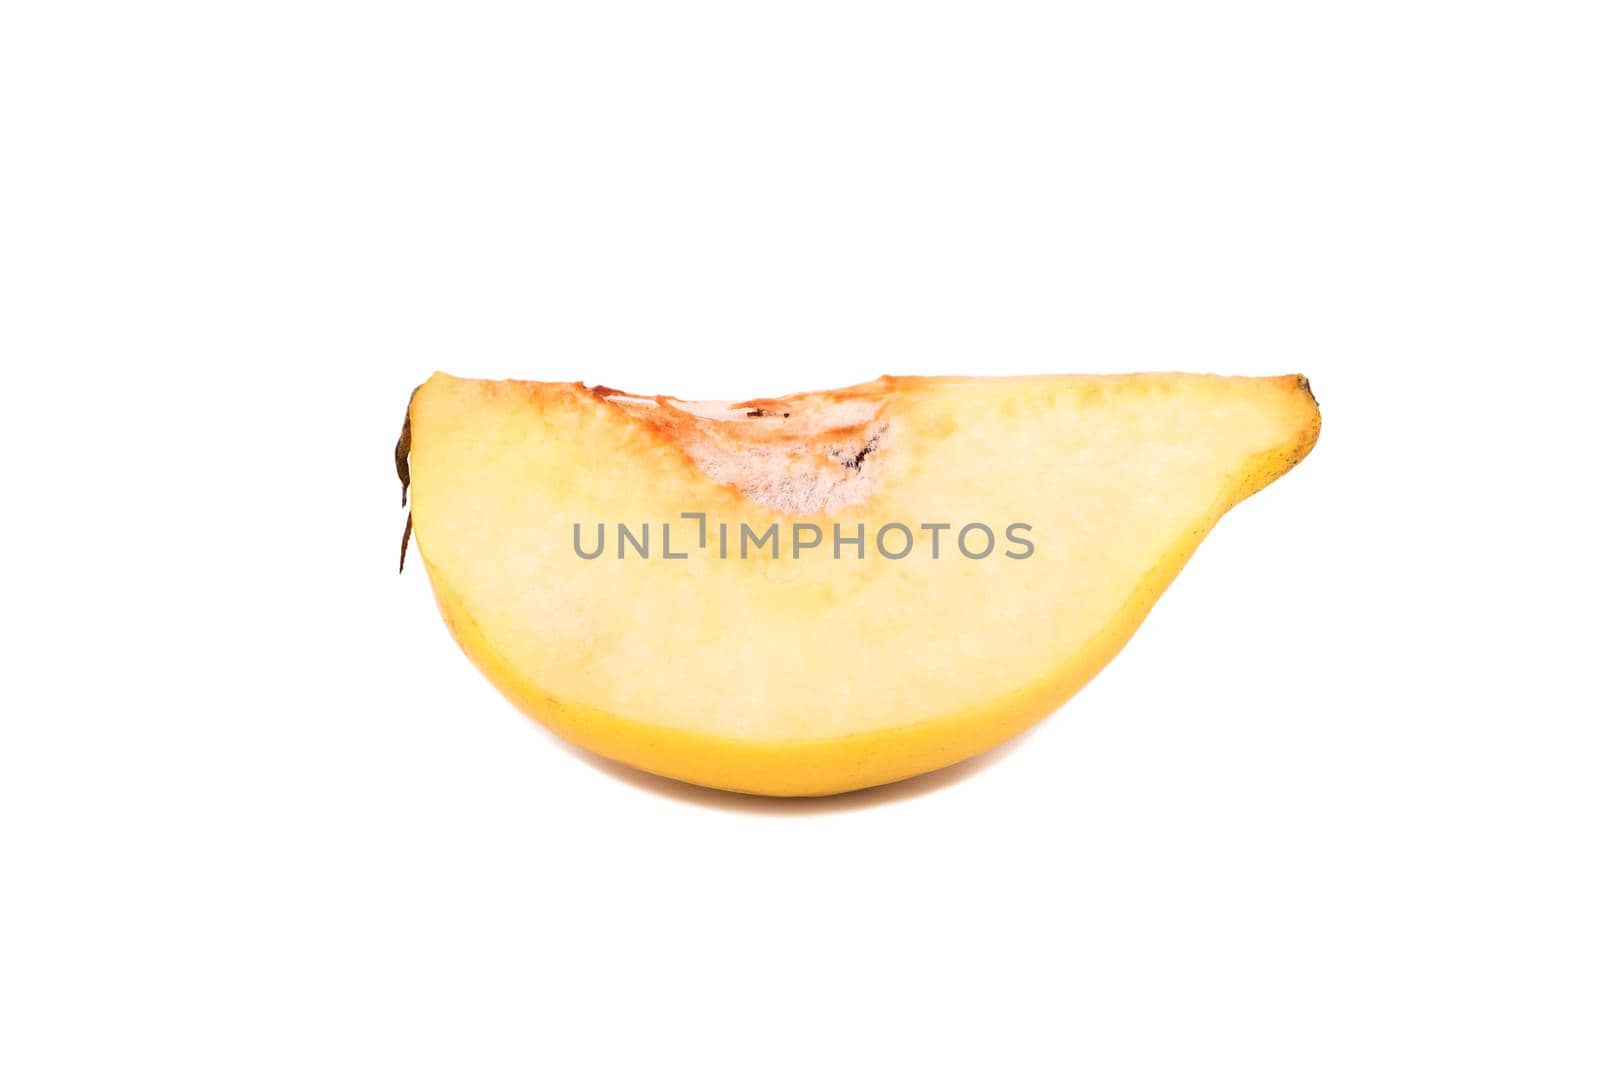 Slice of ripe quince fruit isolated on white background